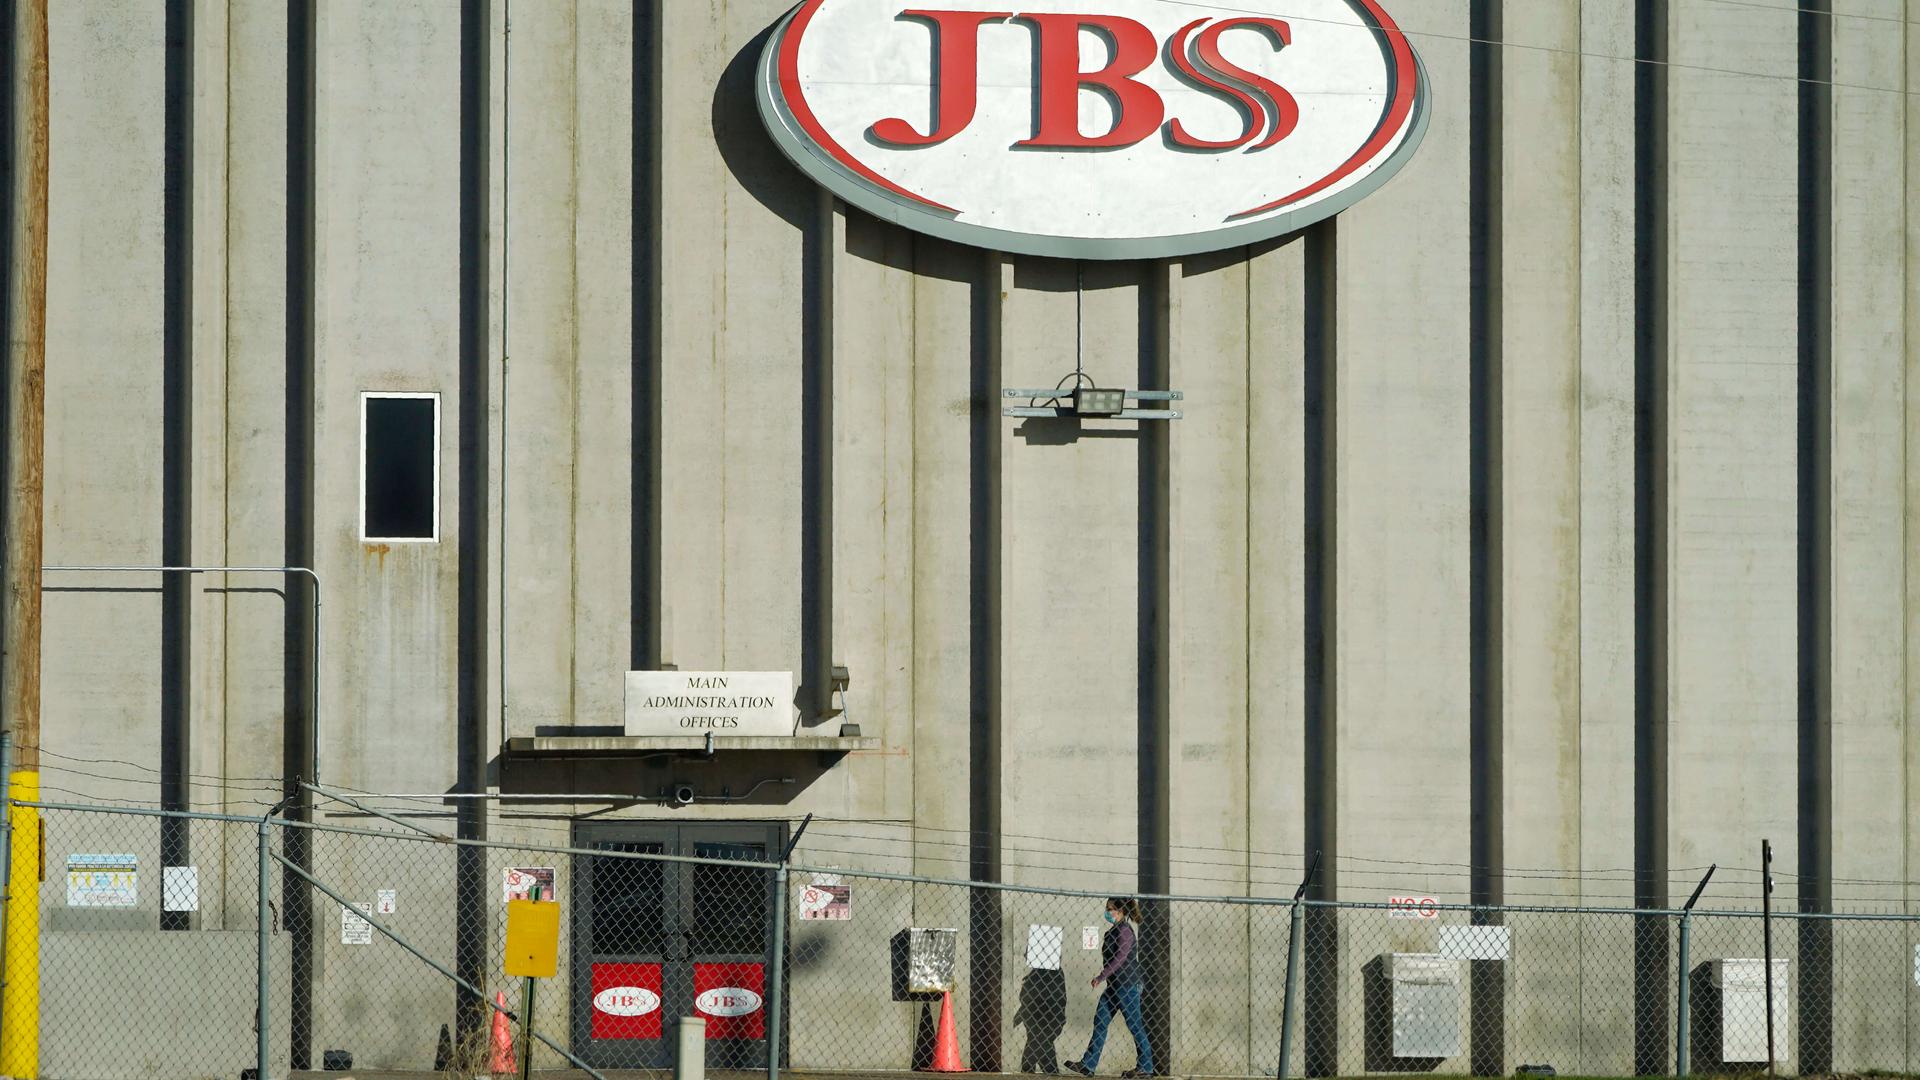 JBS red sign on meat factory building facade.